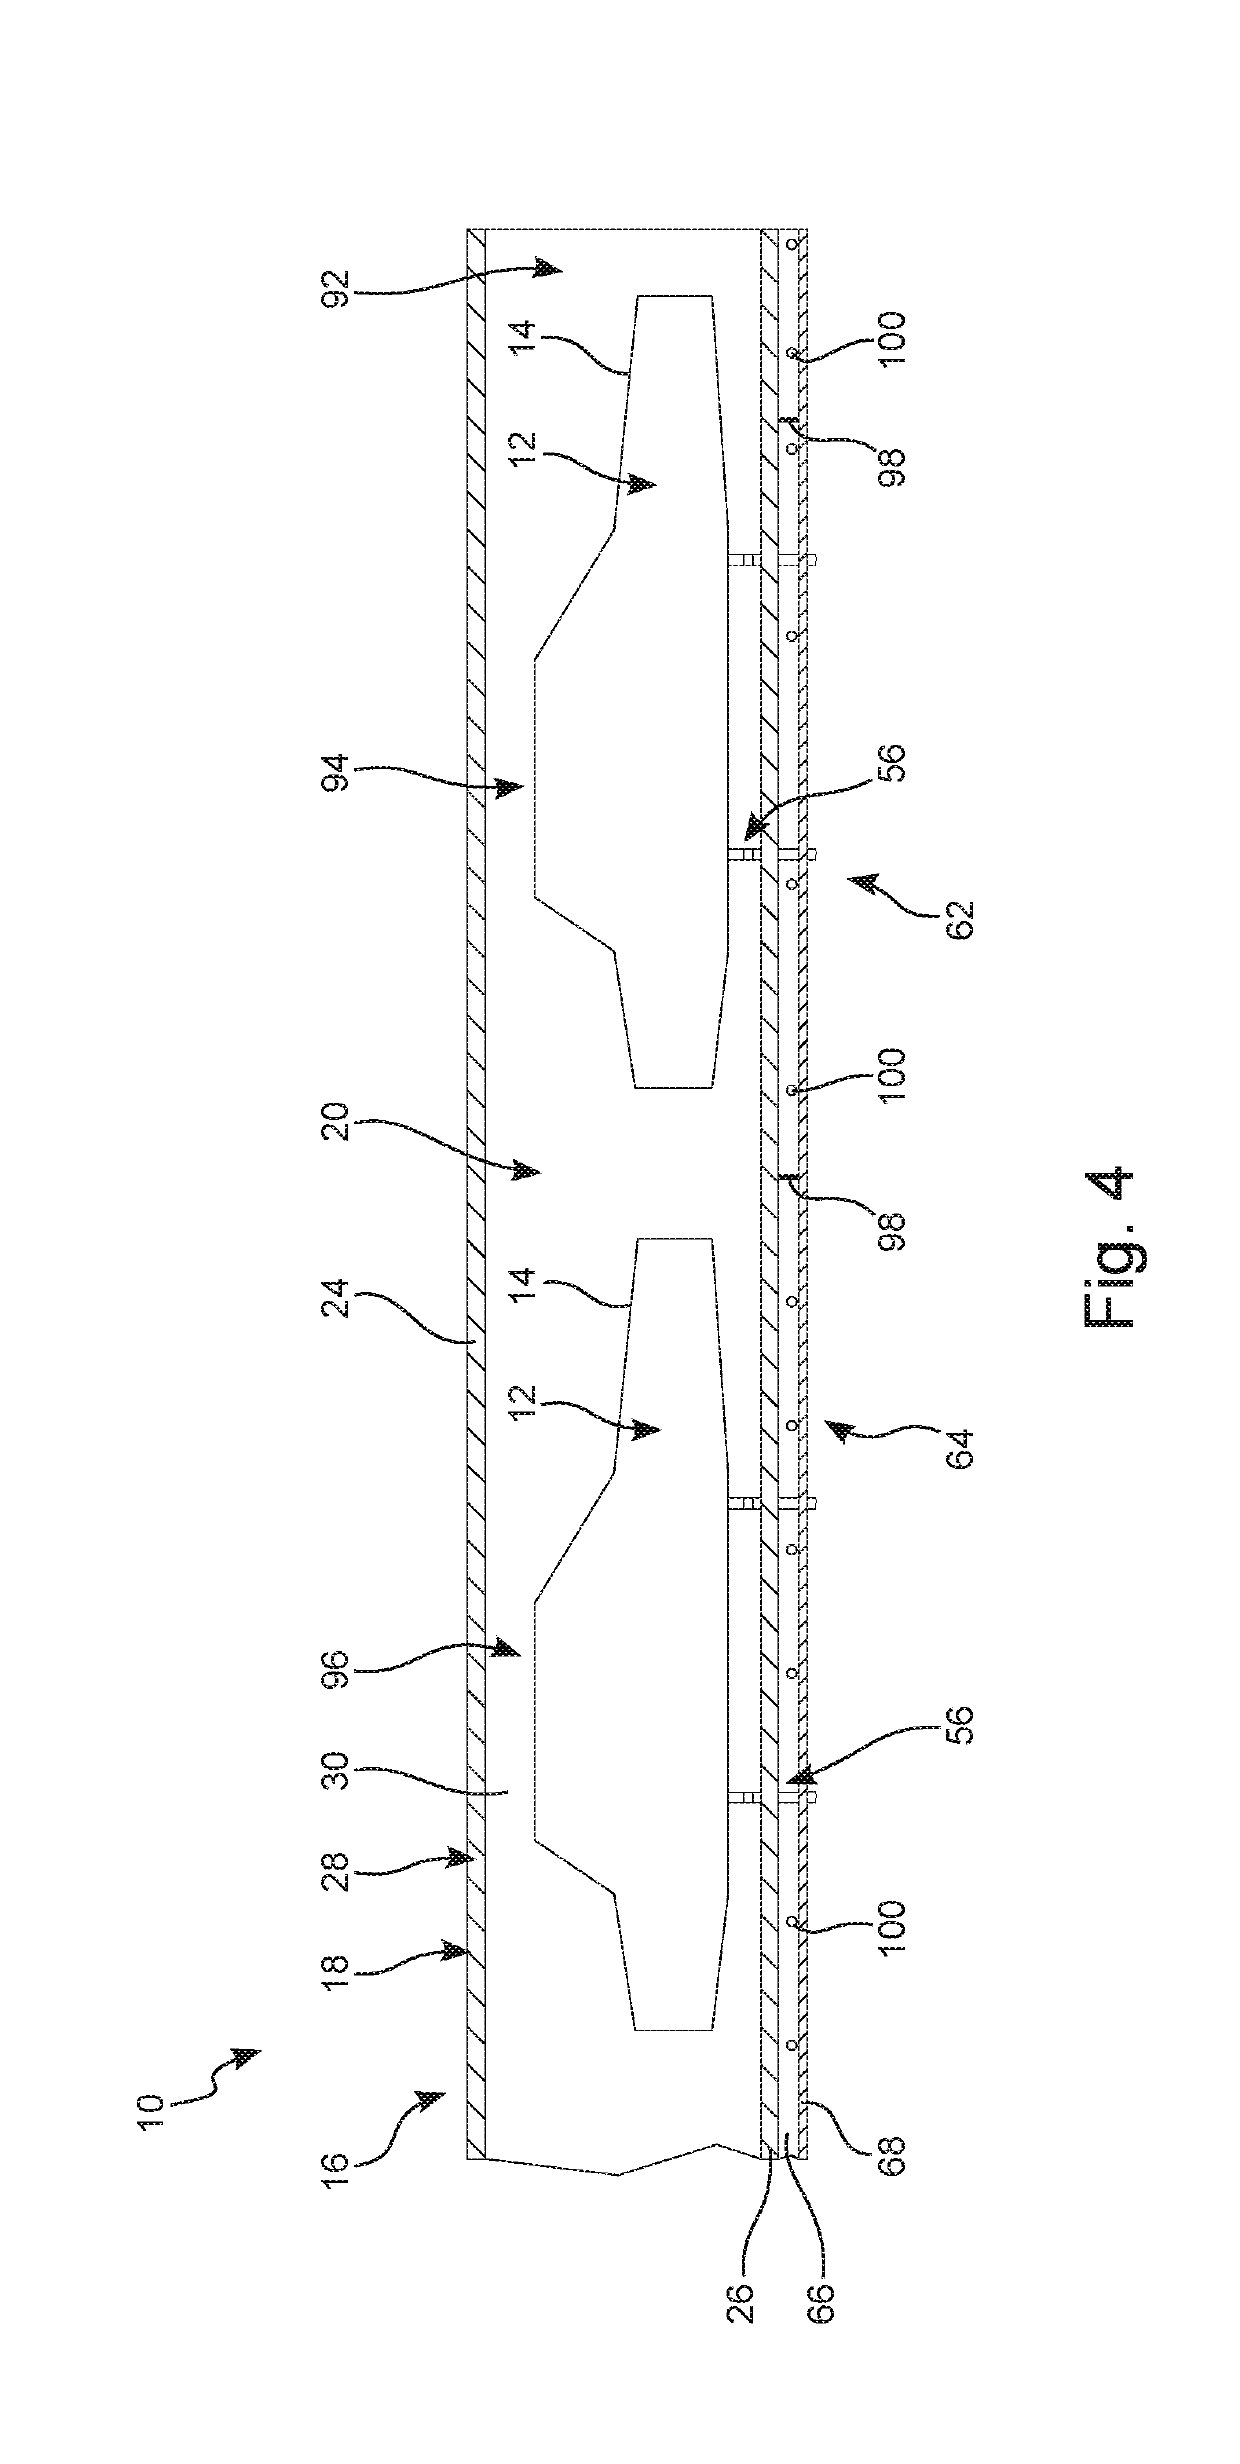 Treatment installation and method for treating workpieces